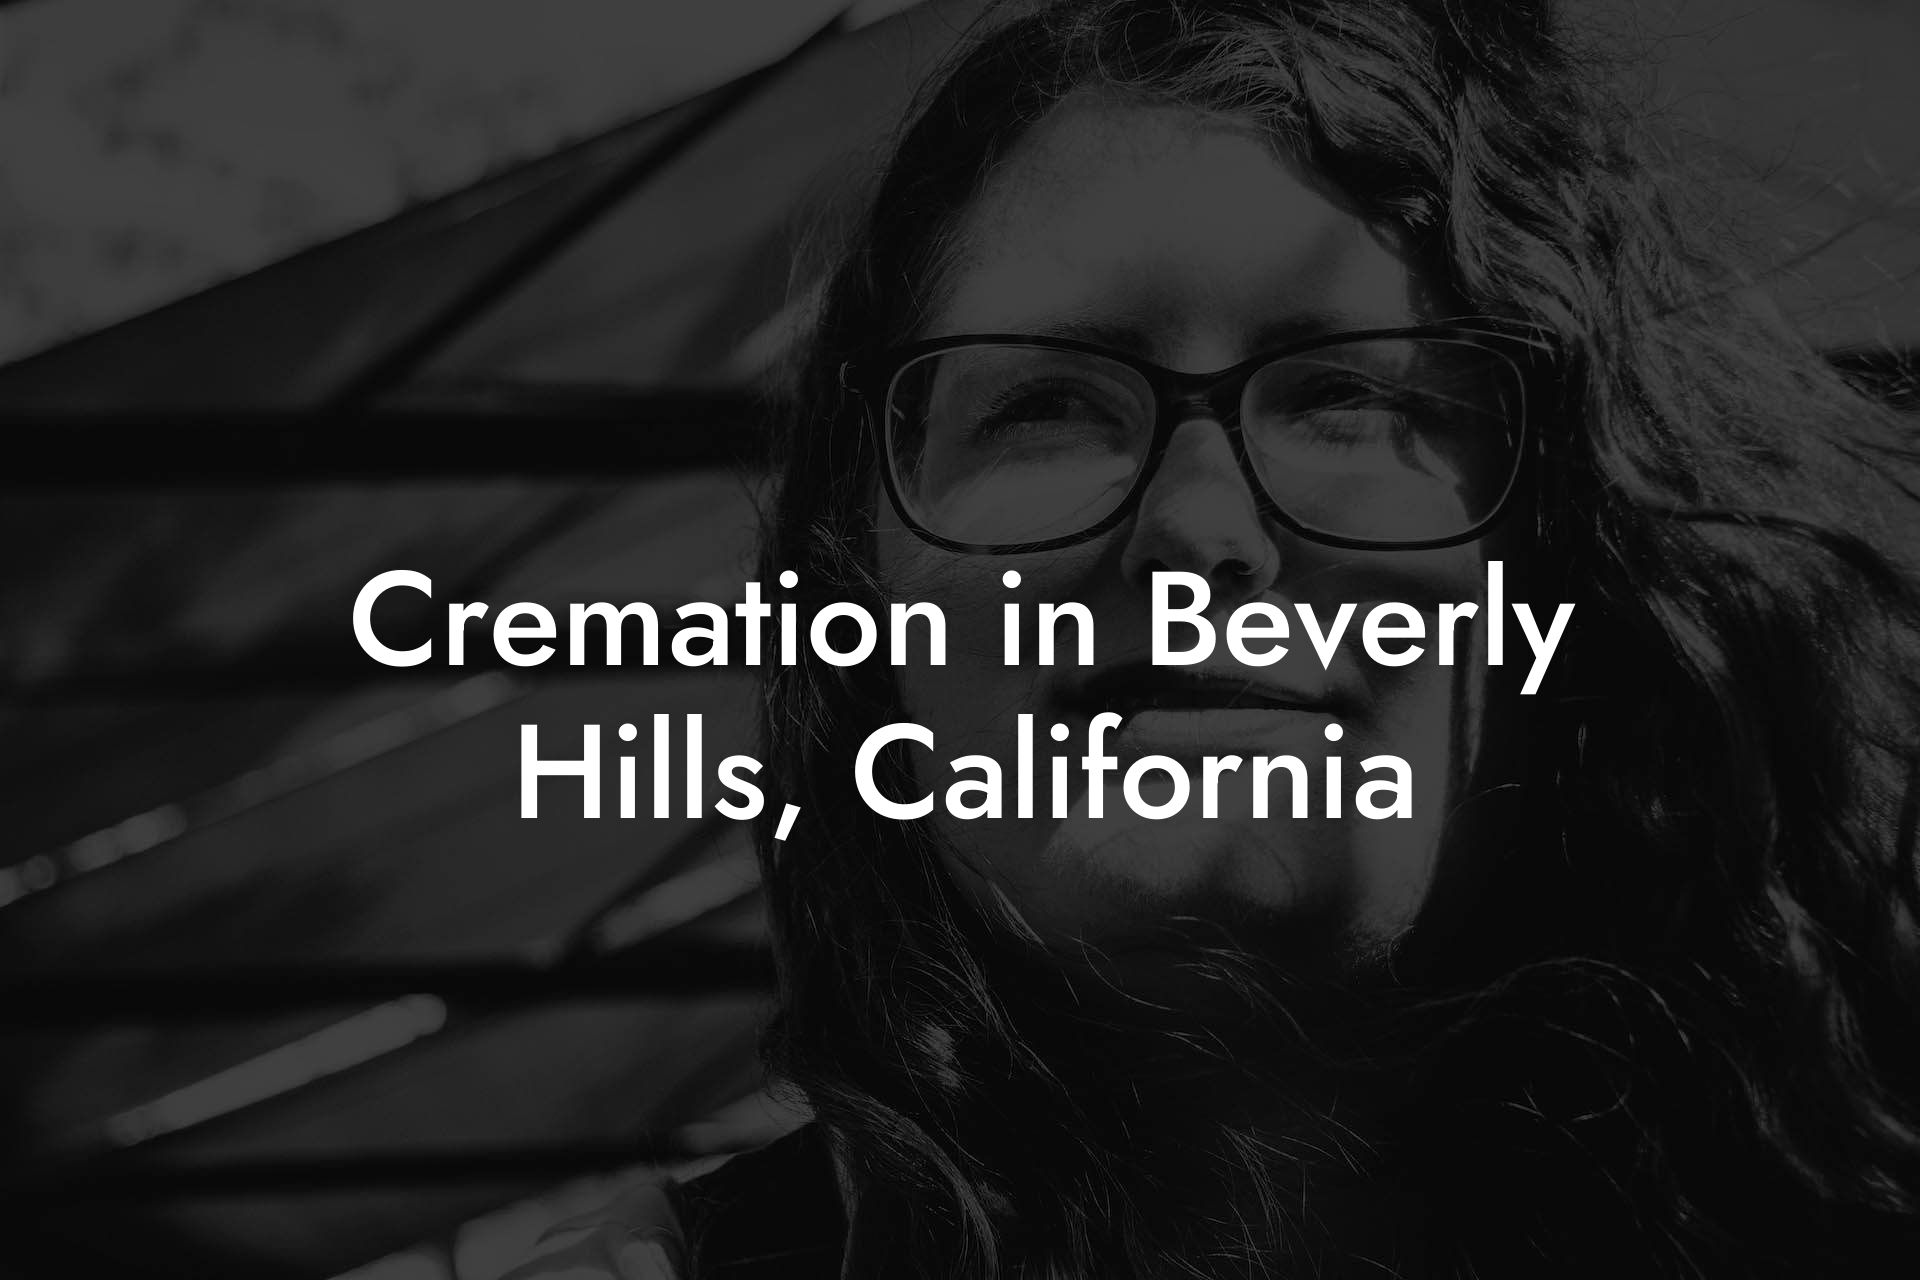 Cremation in Beverly Hills, California